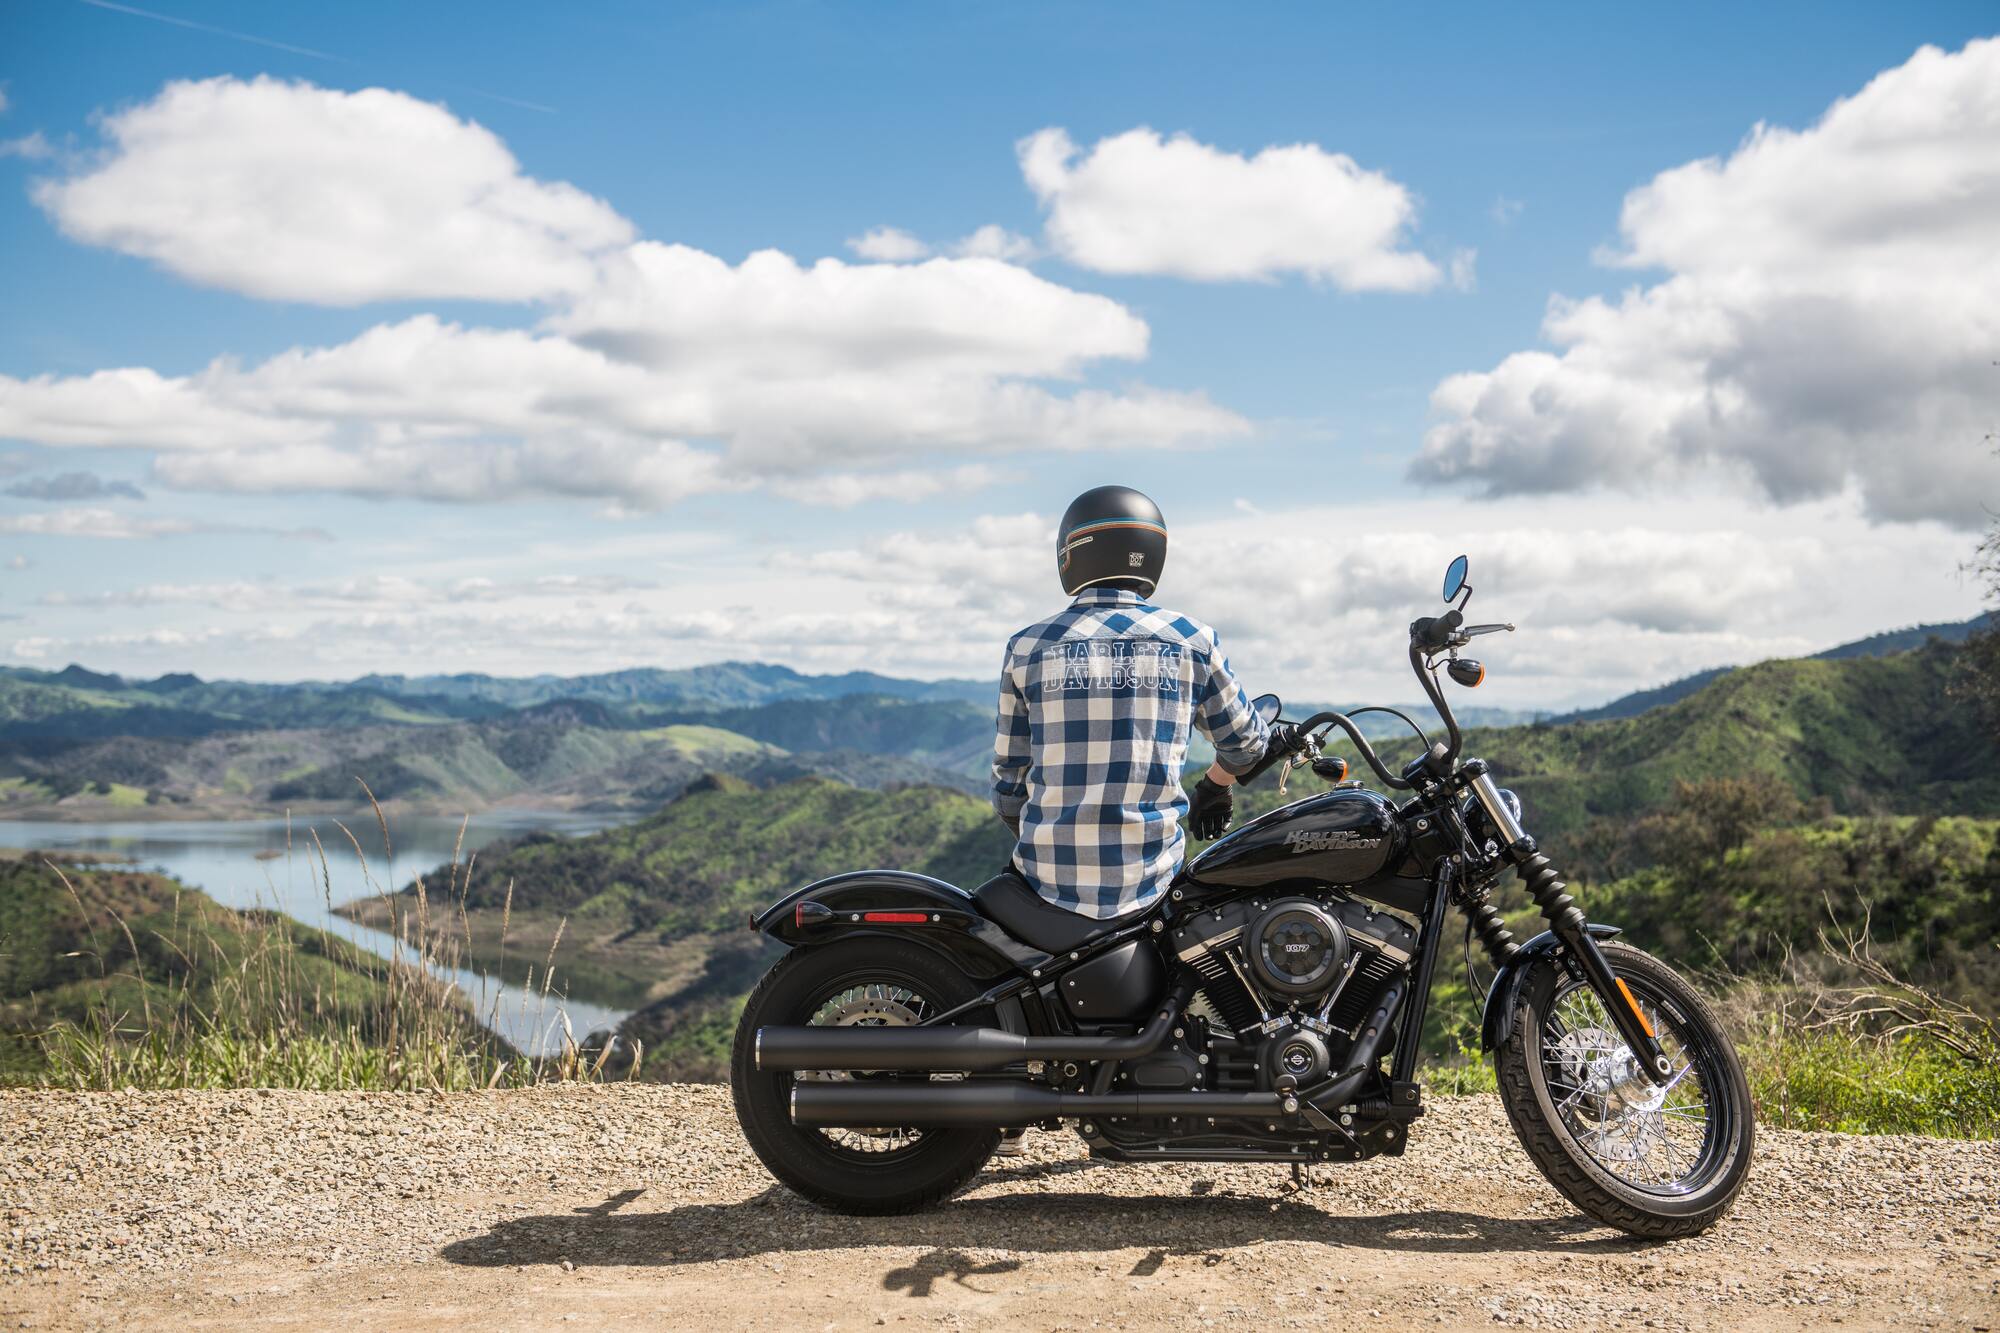 The Top Reasons You Should Buy a Motorcycle